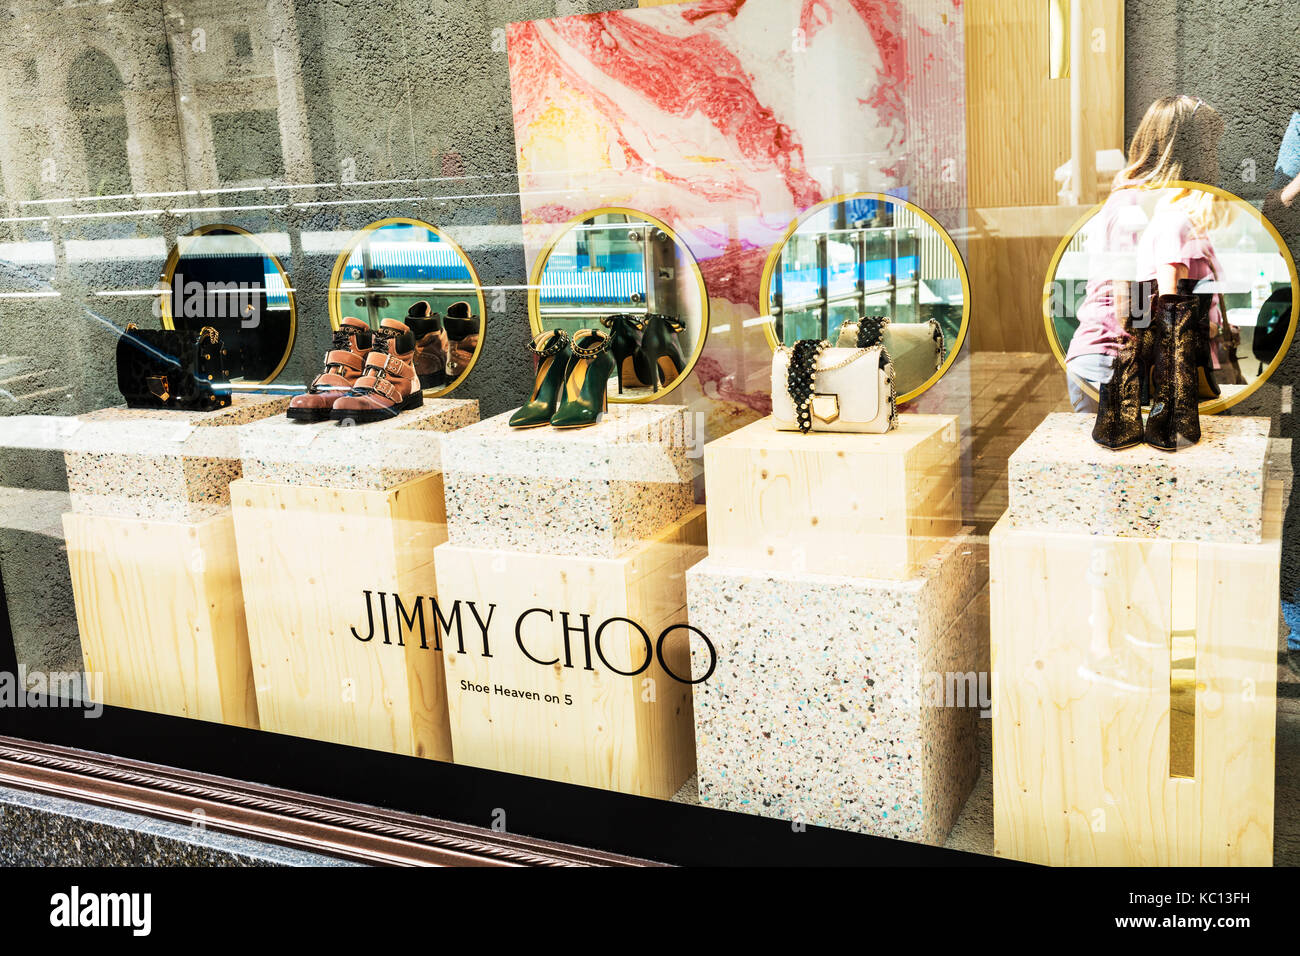 Jimmy choo stock photography and images Alamy